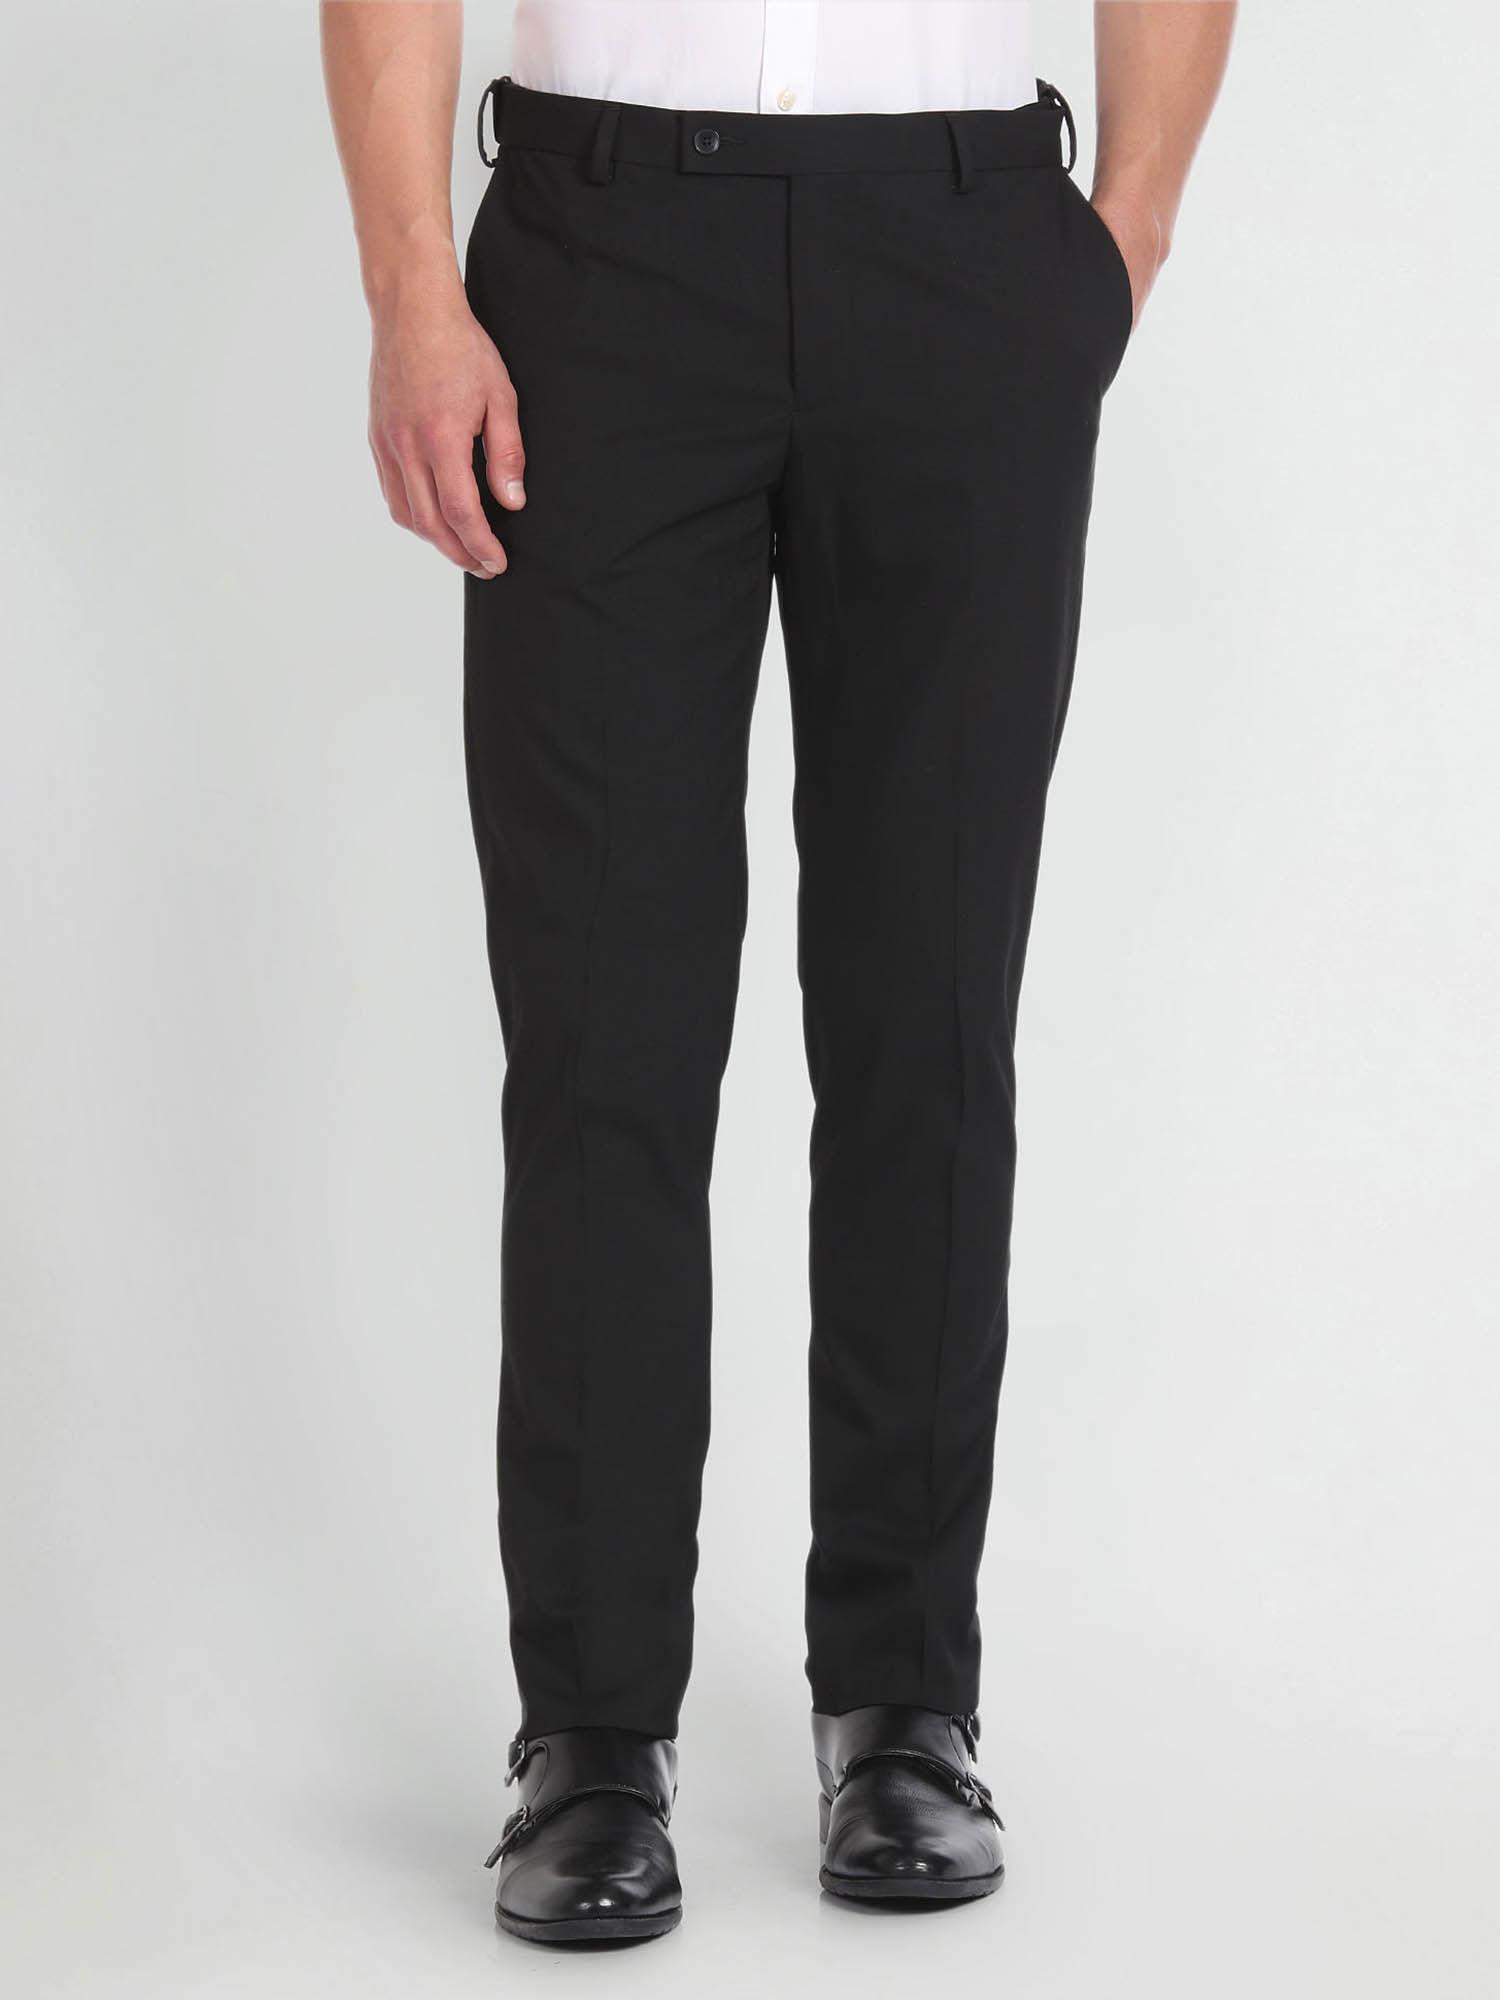 mid rise patterned formal trousers